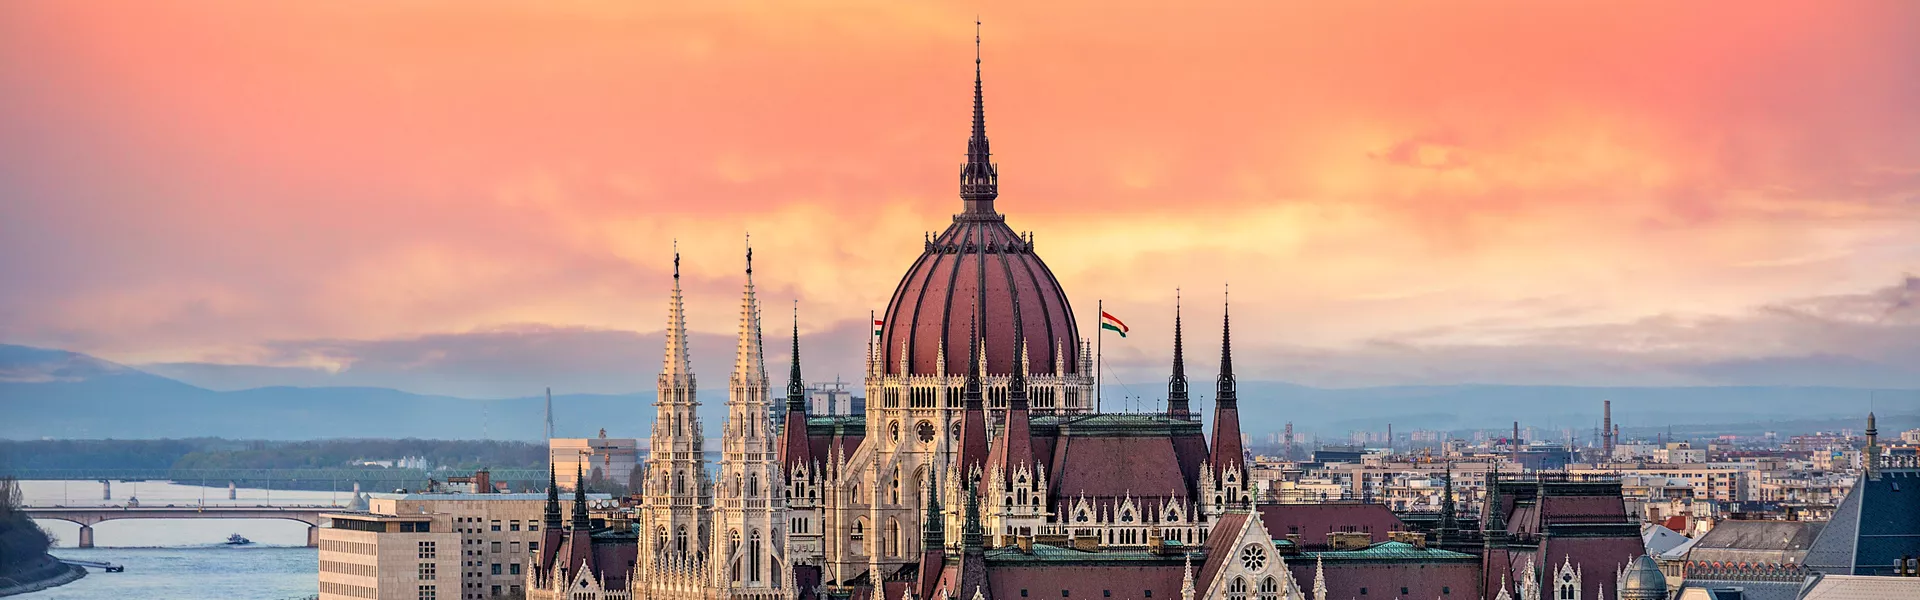 Hungary Guided Tours Travel Guide